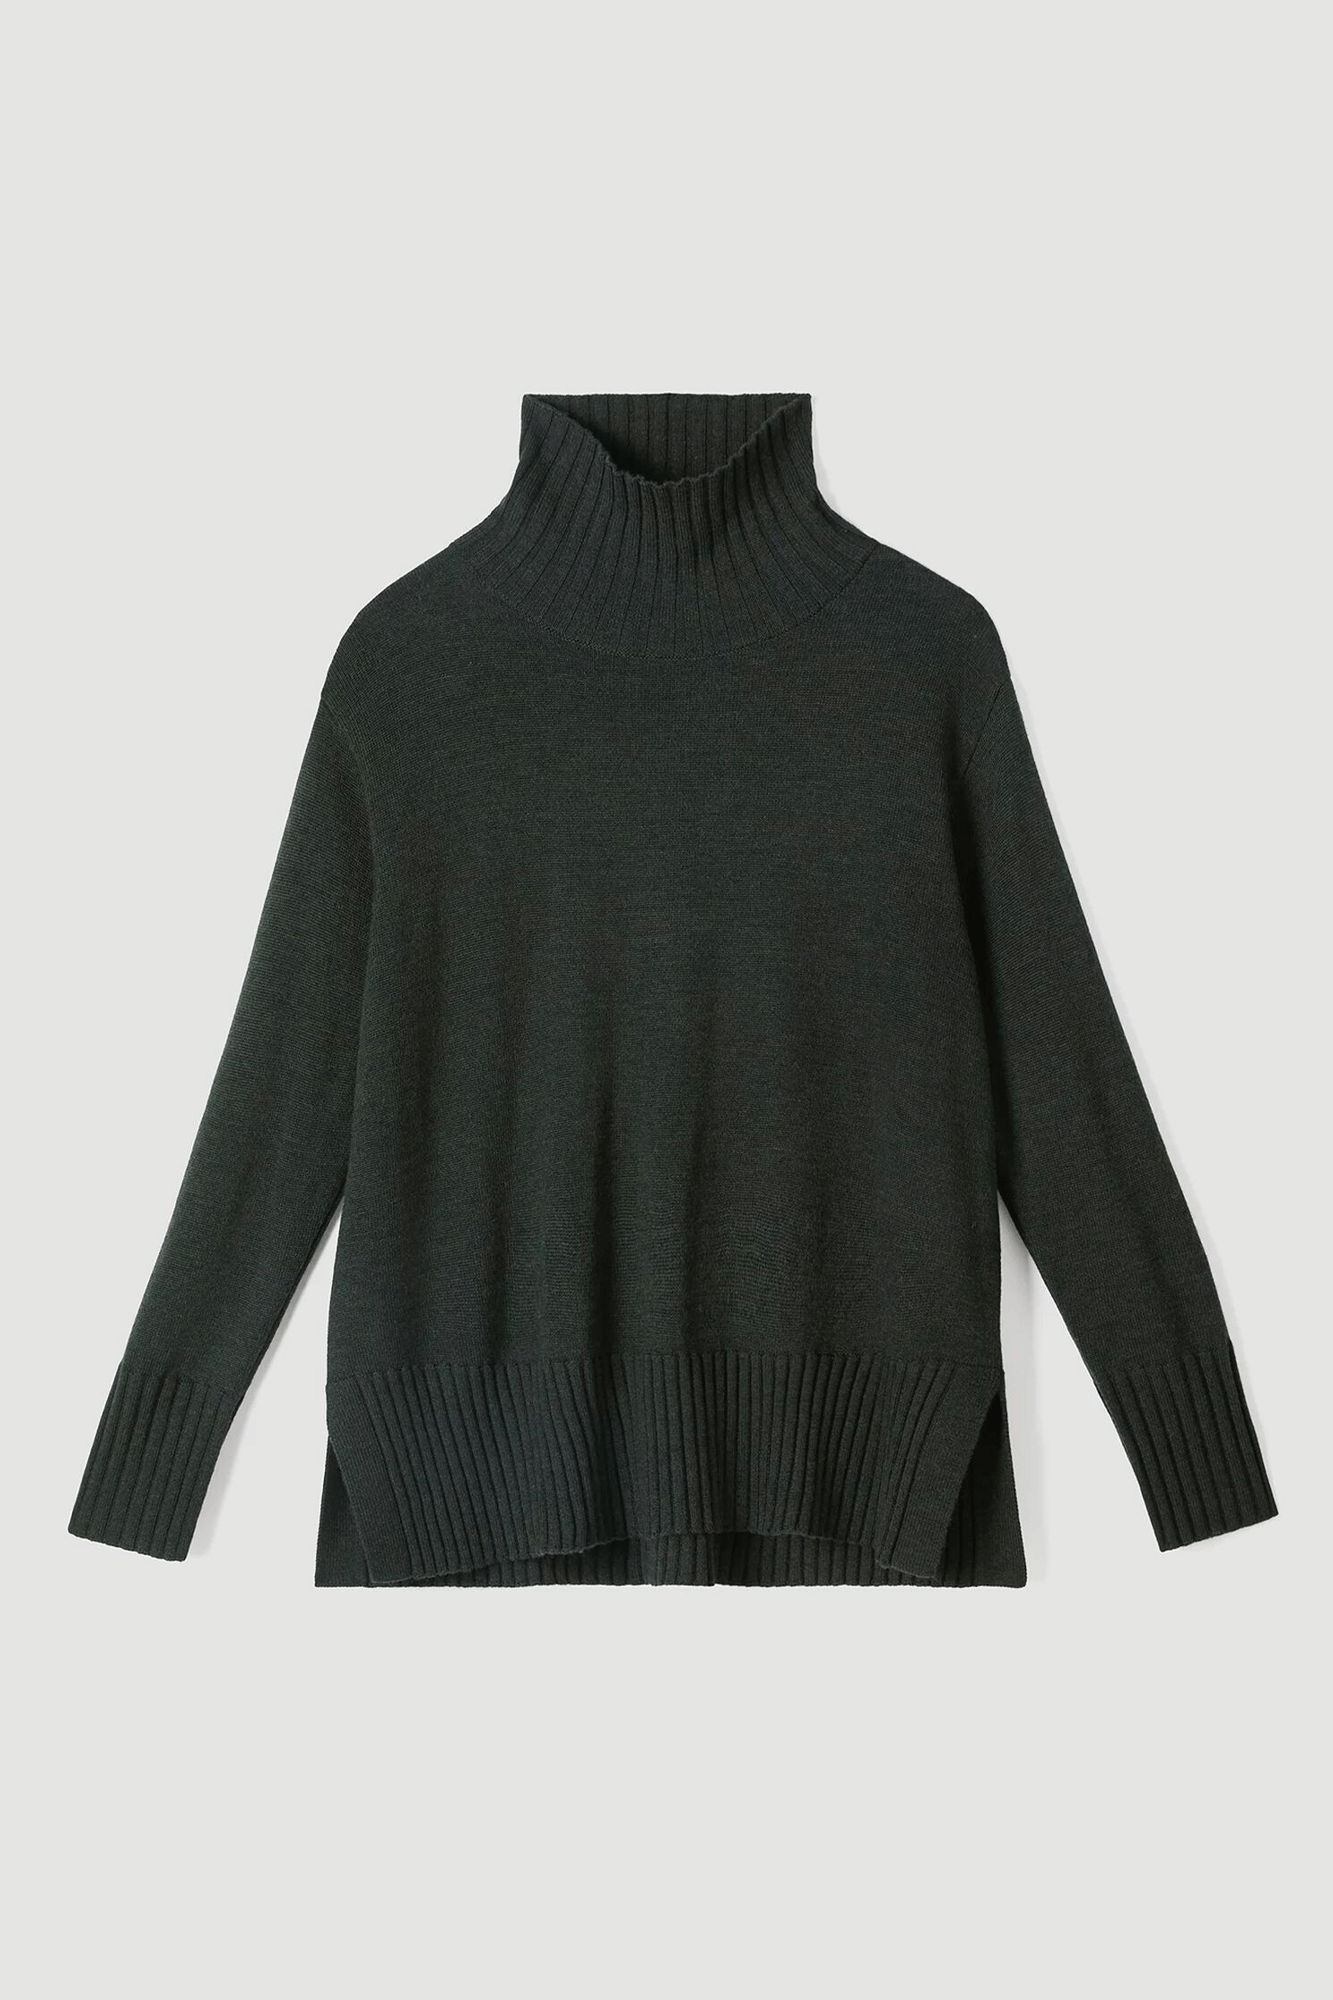 This Turtleneck Square Armhole Pullover from Eileen Fisher is simple and elevated, designed with side slits and rib trim for a cozier fit. Crafted in Merino Jersey with regenerative fiber, it is both soft and sustainable. Black colorway is made from wool from farms practicing better animal welfare and land management.